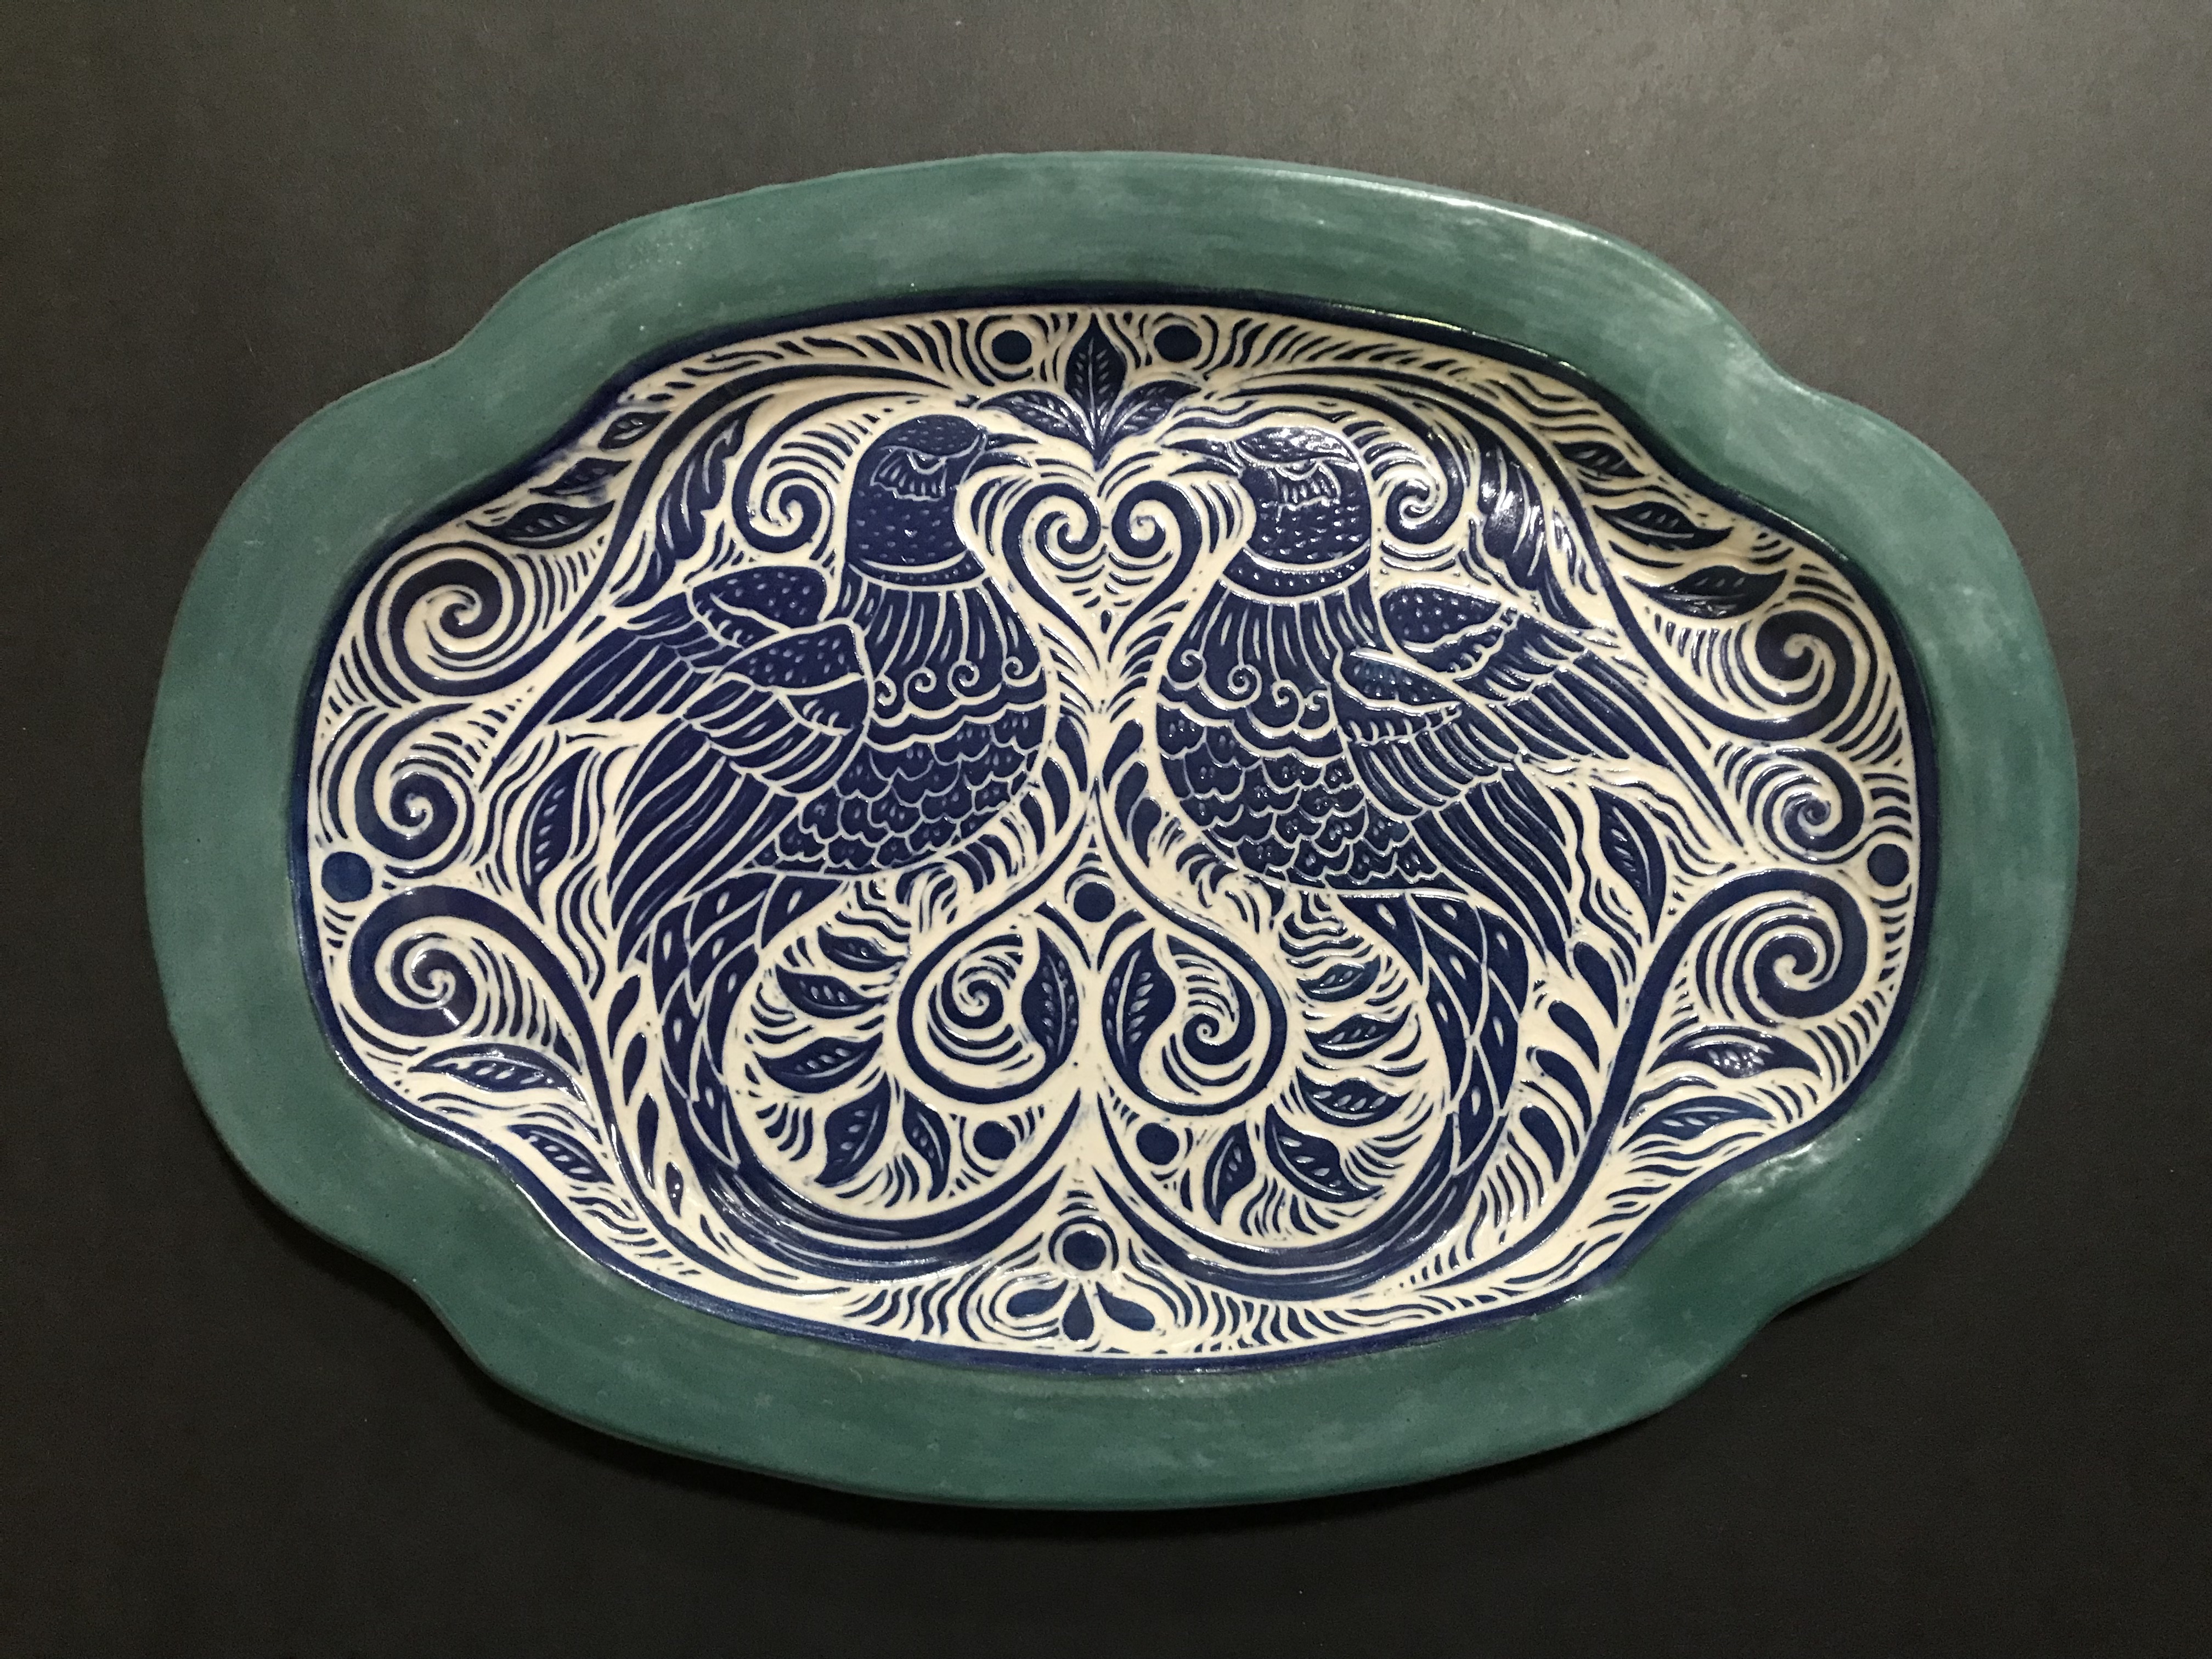 Large Serving Platter In Blue and Turquoise with Sgrafitto Carved Lovebird Design